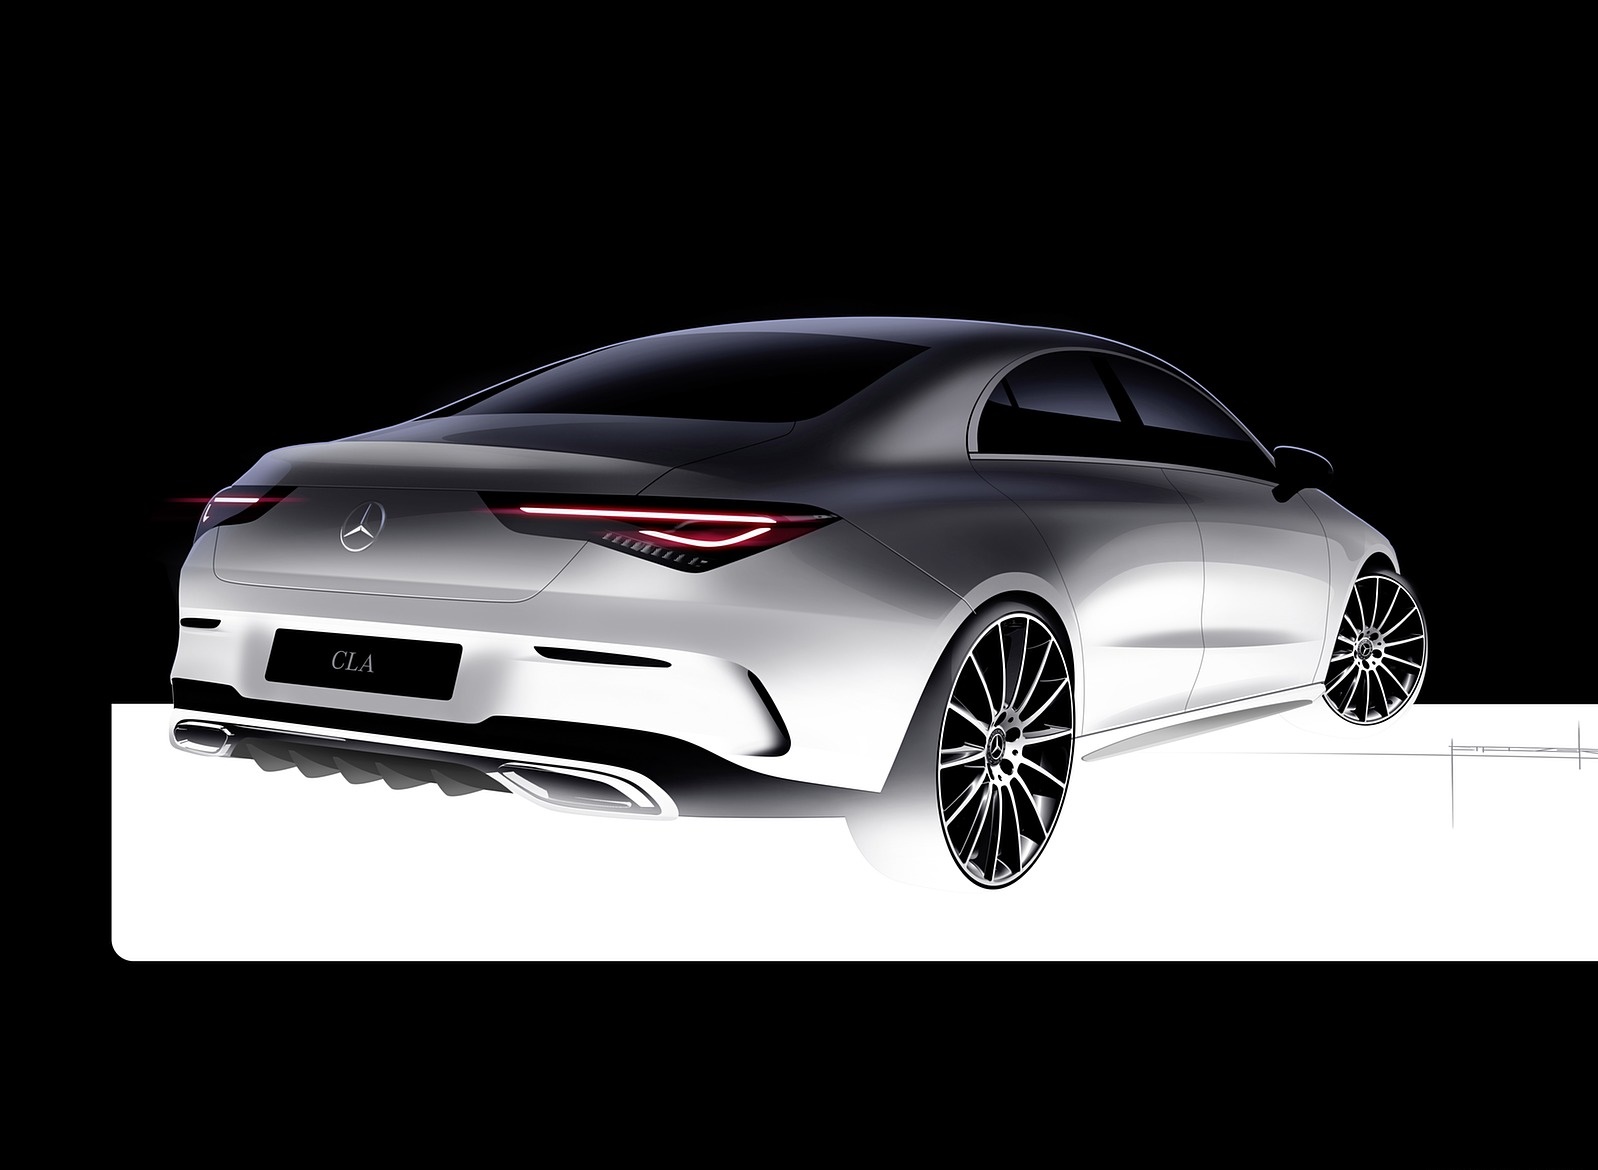 2020 Mercedes-Benz CLA 250 Coupe Design Sketch Wallpapers #133 of 133